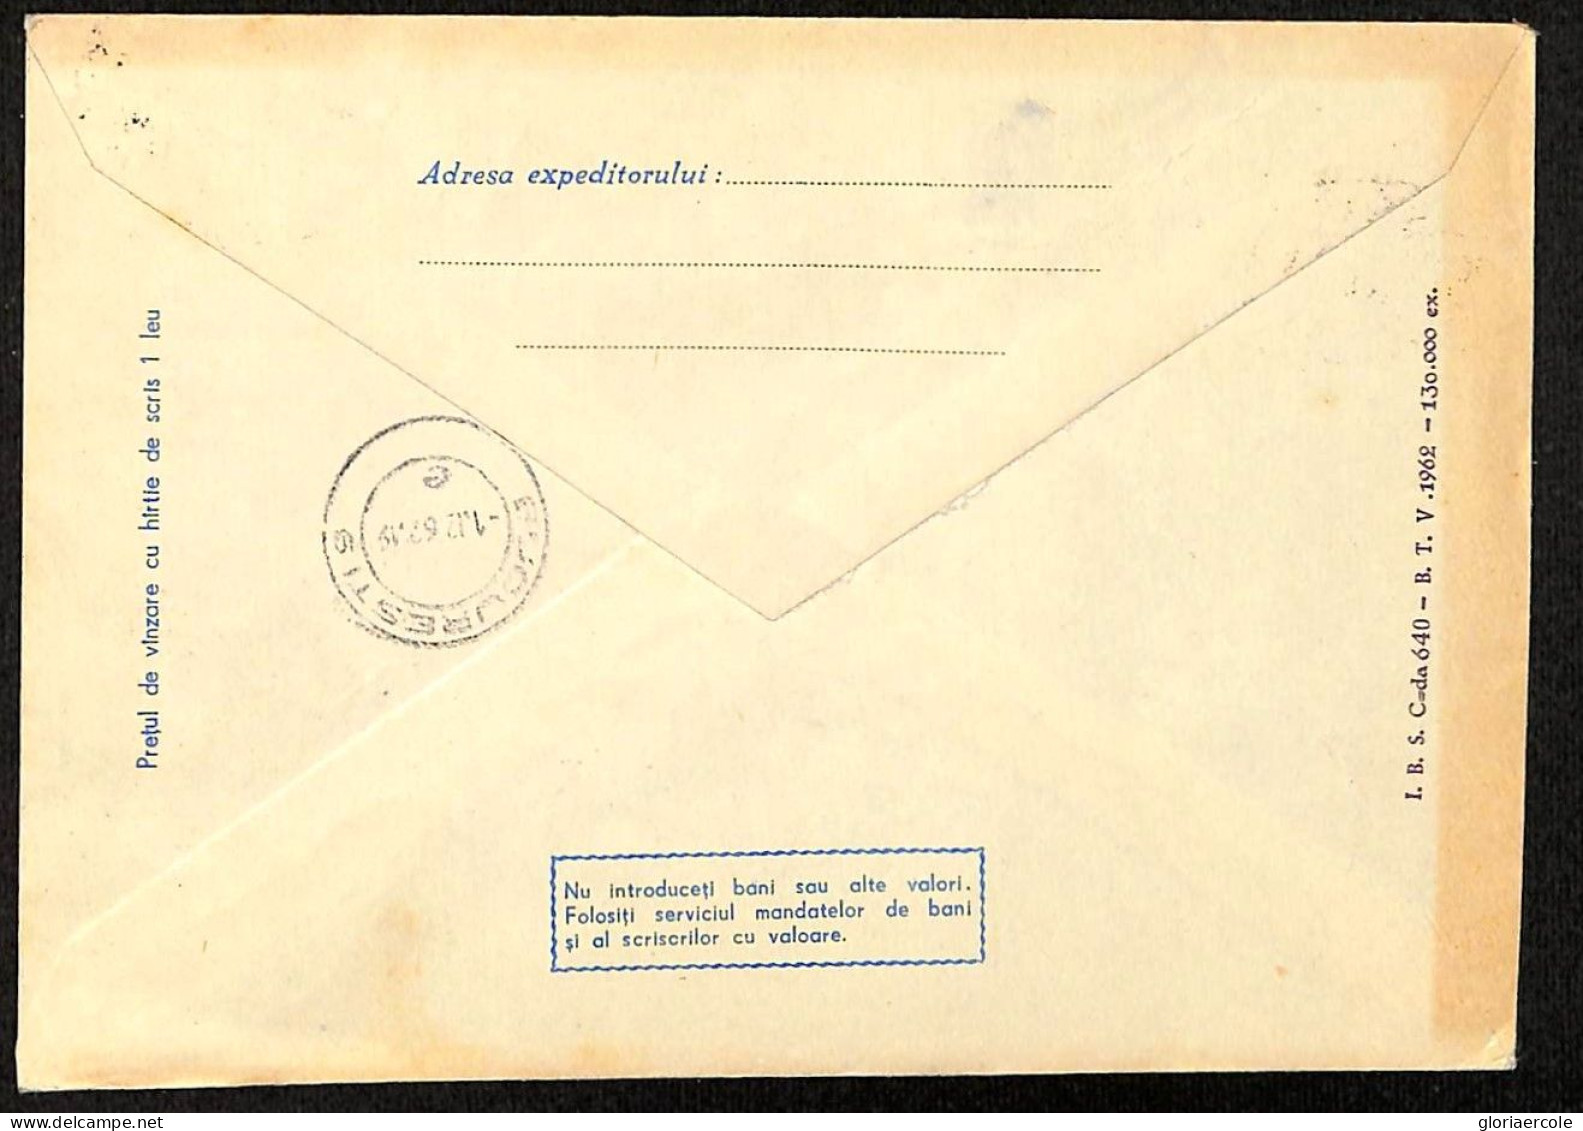 Af3775  - ROMANIA - POSTAL HISTORY - Postal Stationery Cover - ROWING Canoes - Kanu